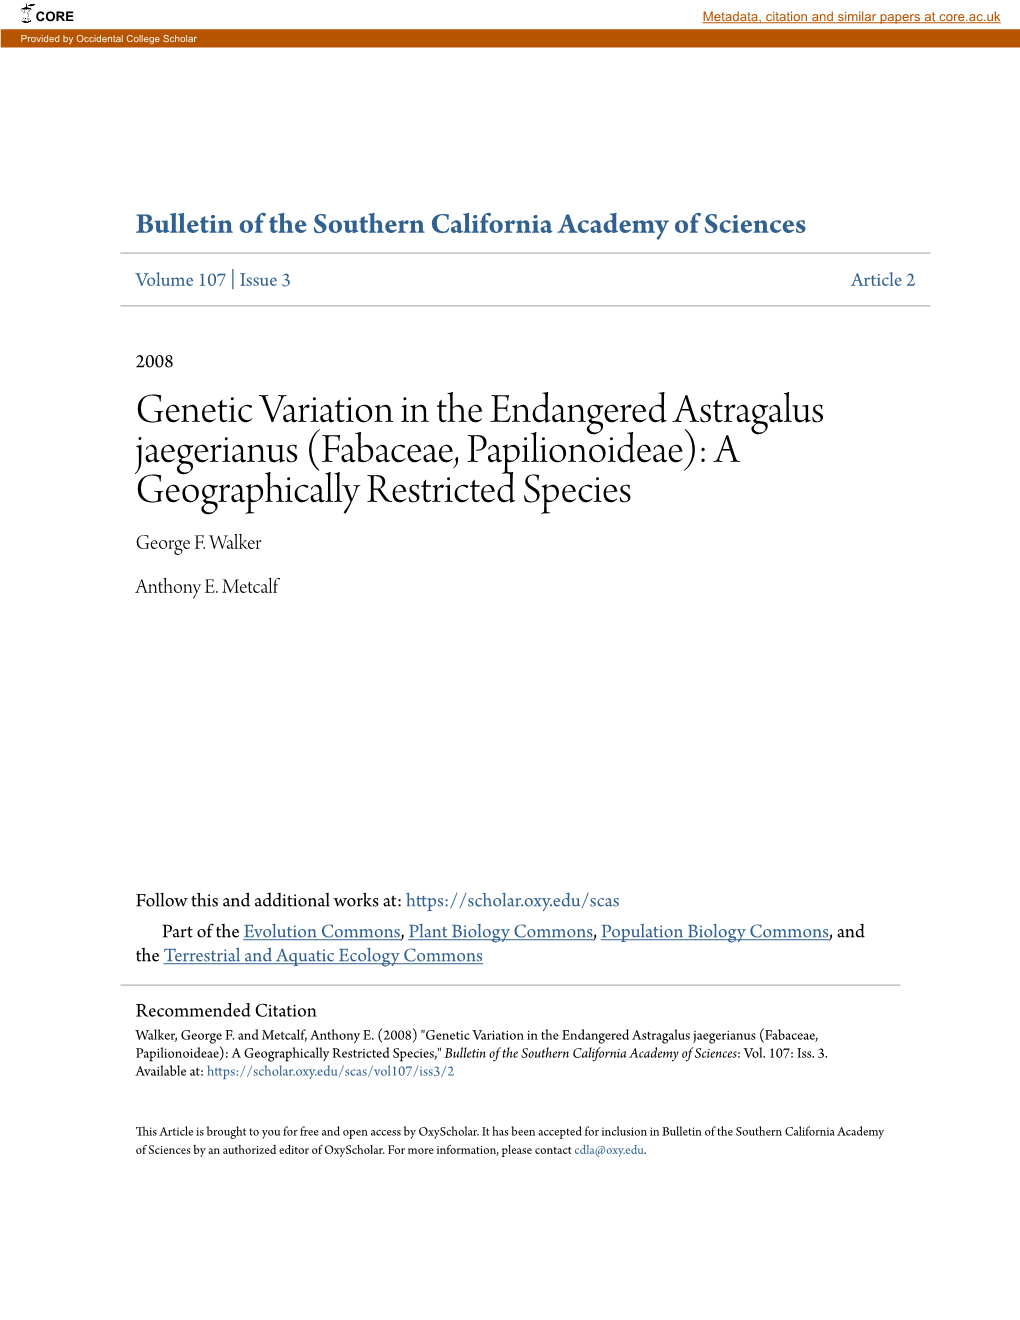 Genetic Variation in the Endangered Astragalus Jaegerianus (Fabaceae, Papilionoideae): a Geographically Restricted Species George F